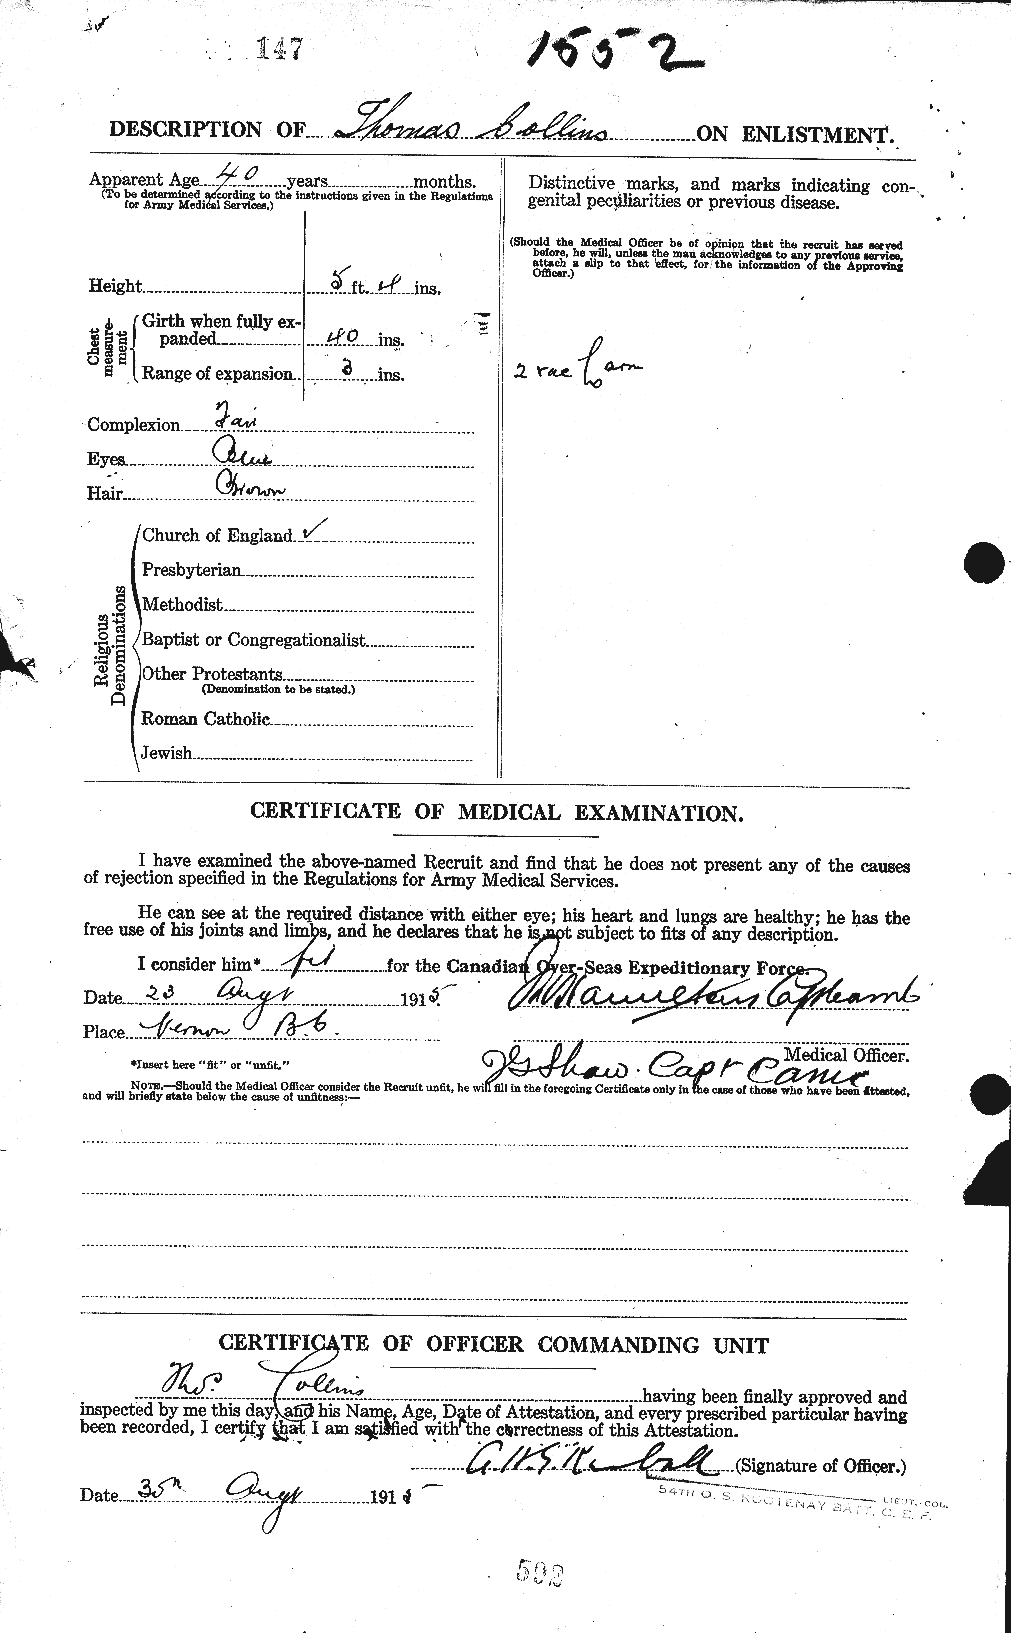 Personnel Records of the First World War - CEF 069144b